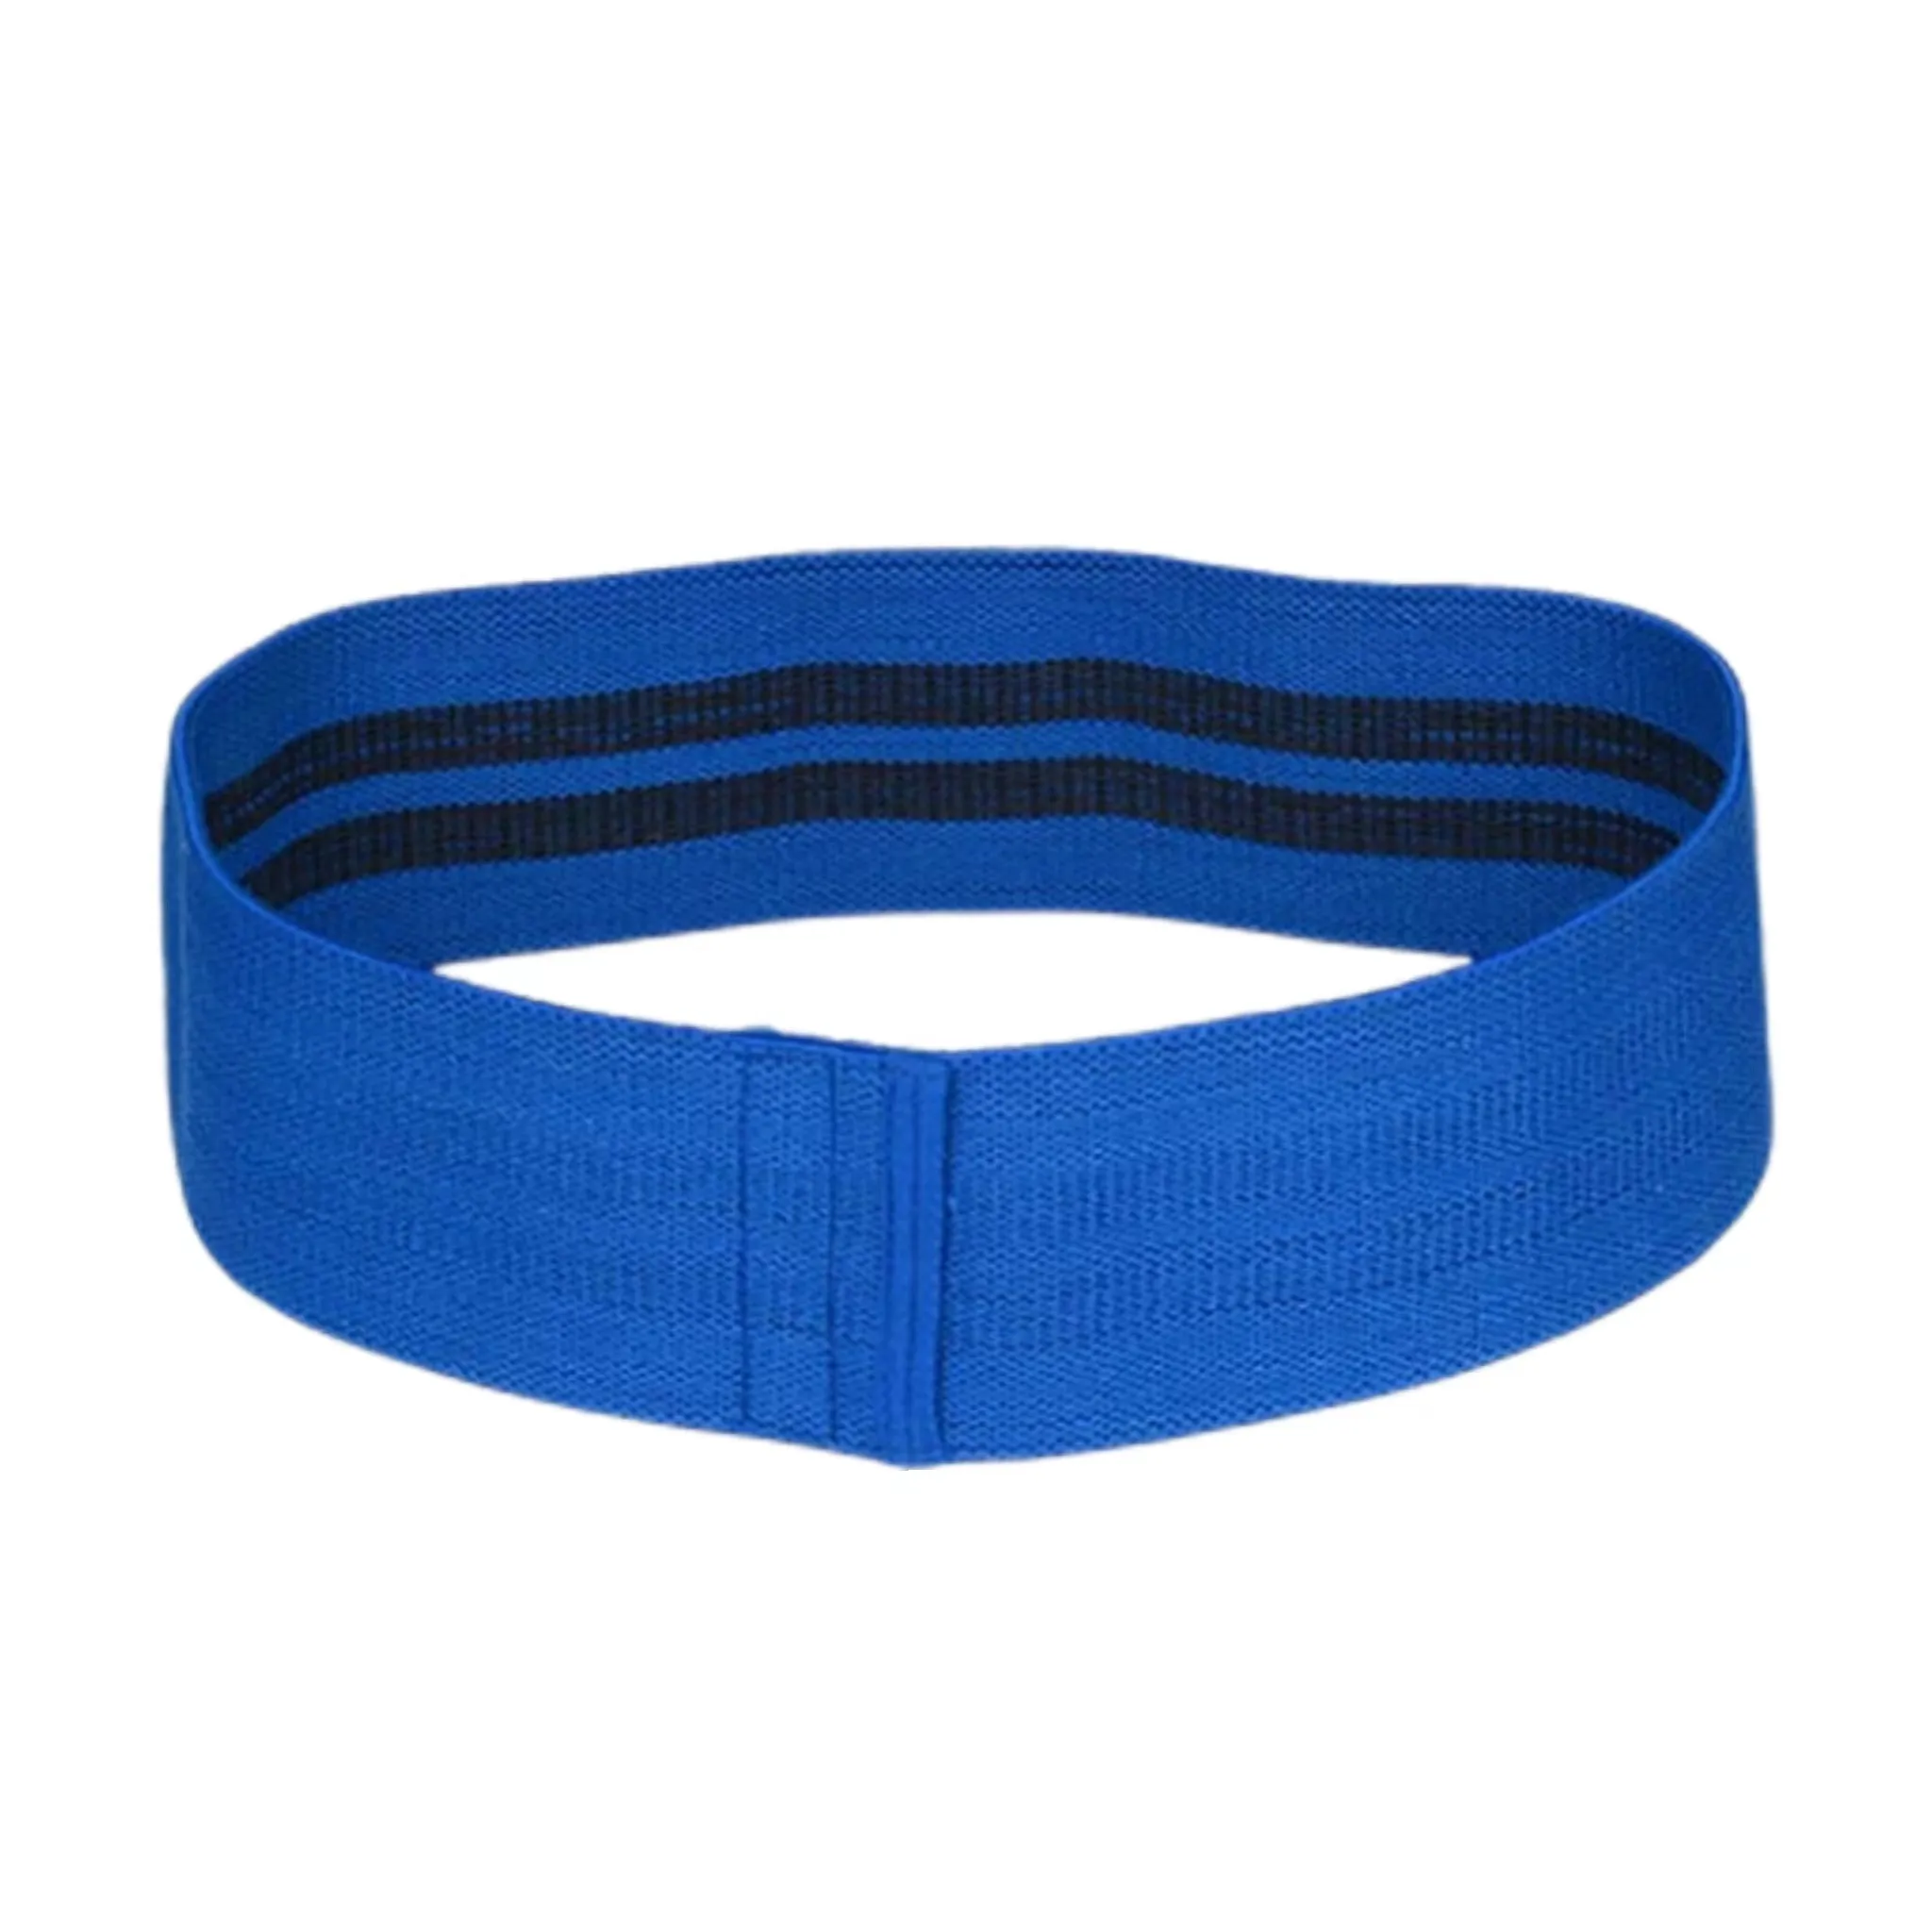 Fitness Resistance Bands Yoga Pilates Thigh Hip Circle Stretch Expander Bands Gym Training Home Workout Equipment Elastic Bands